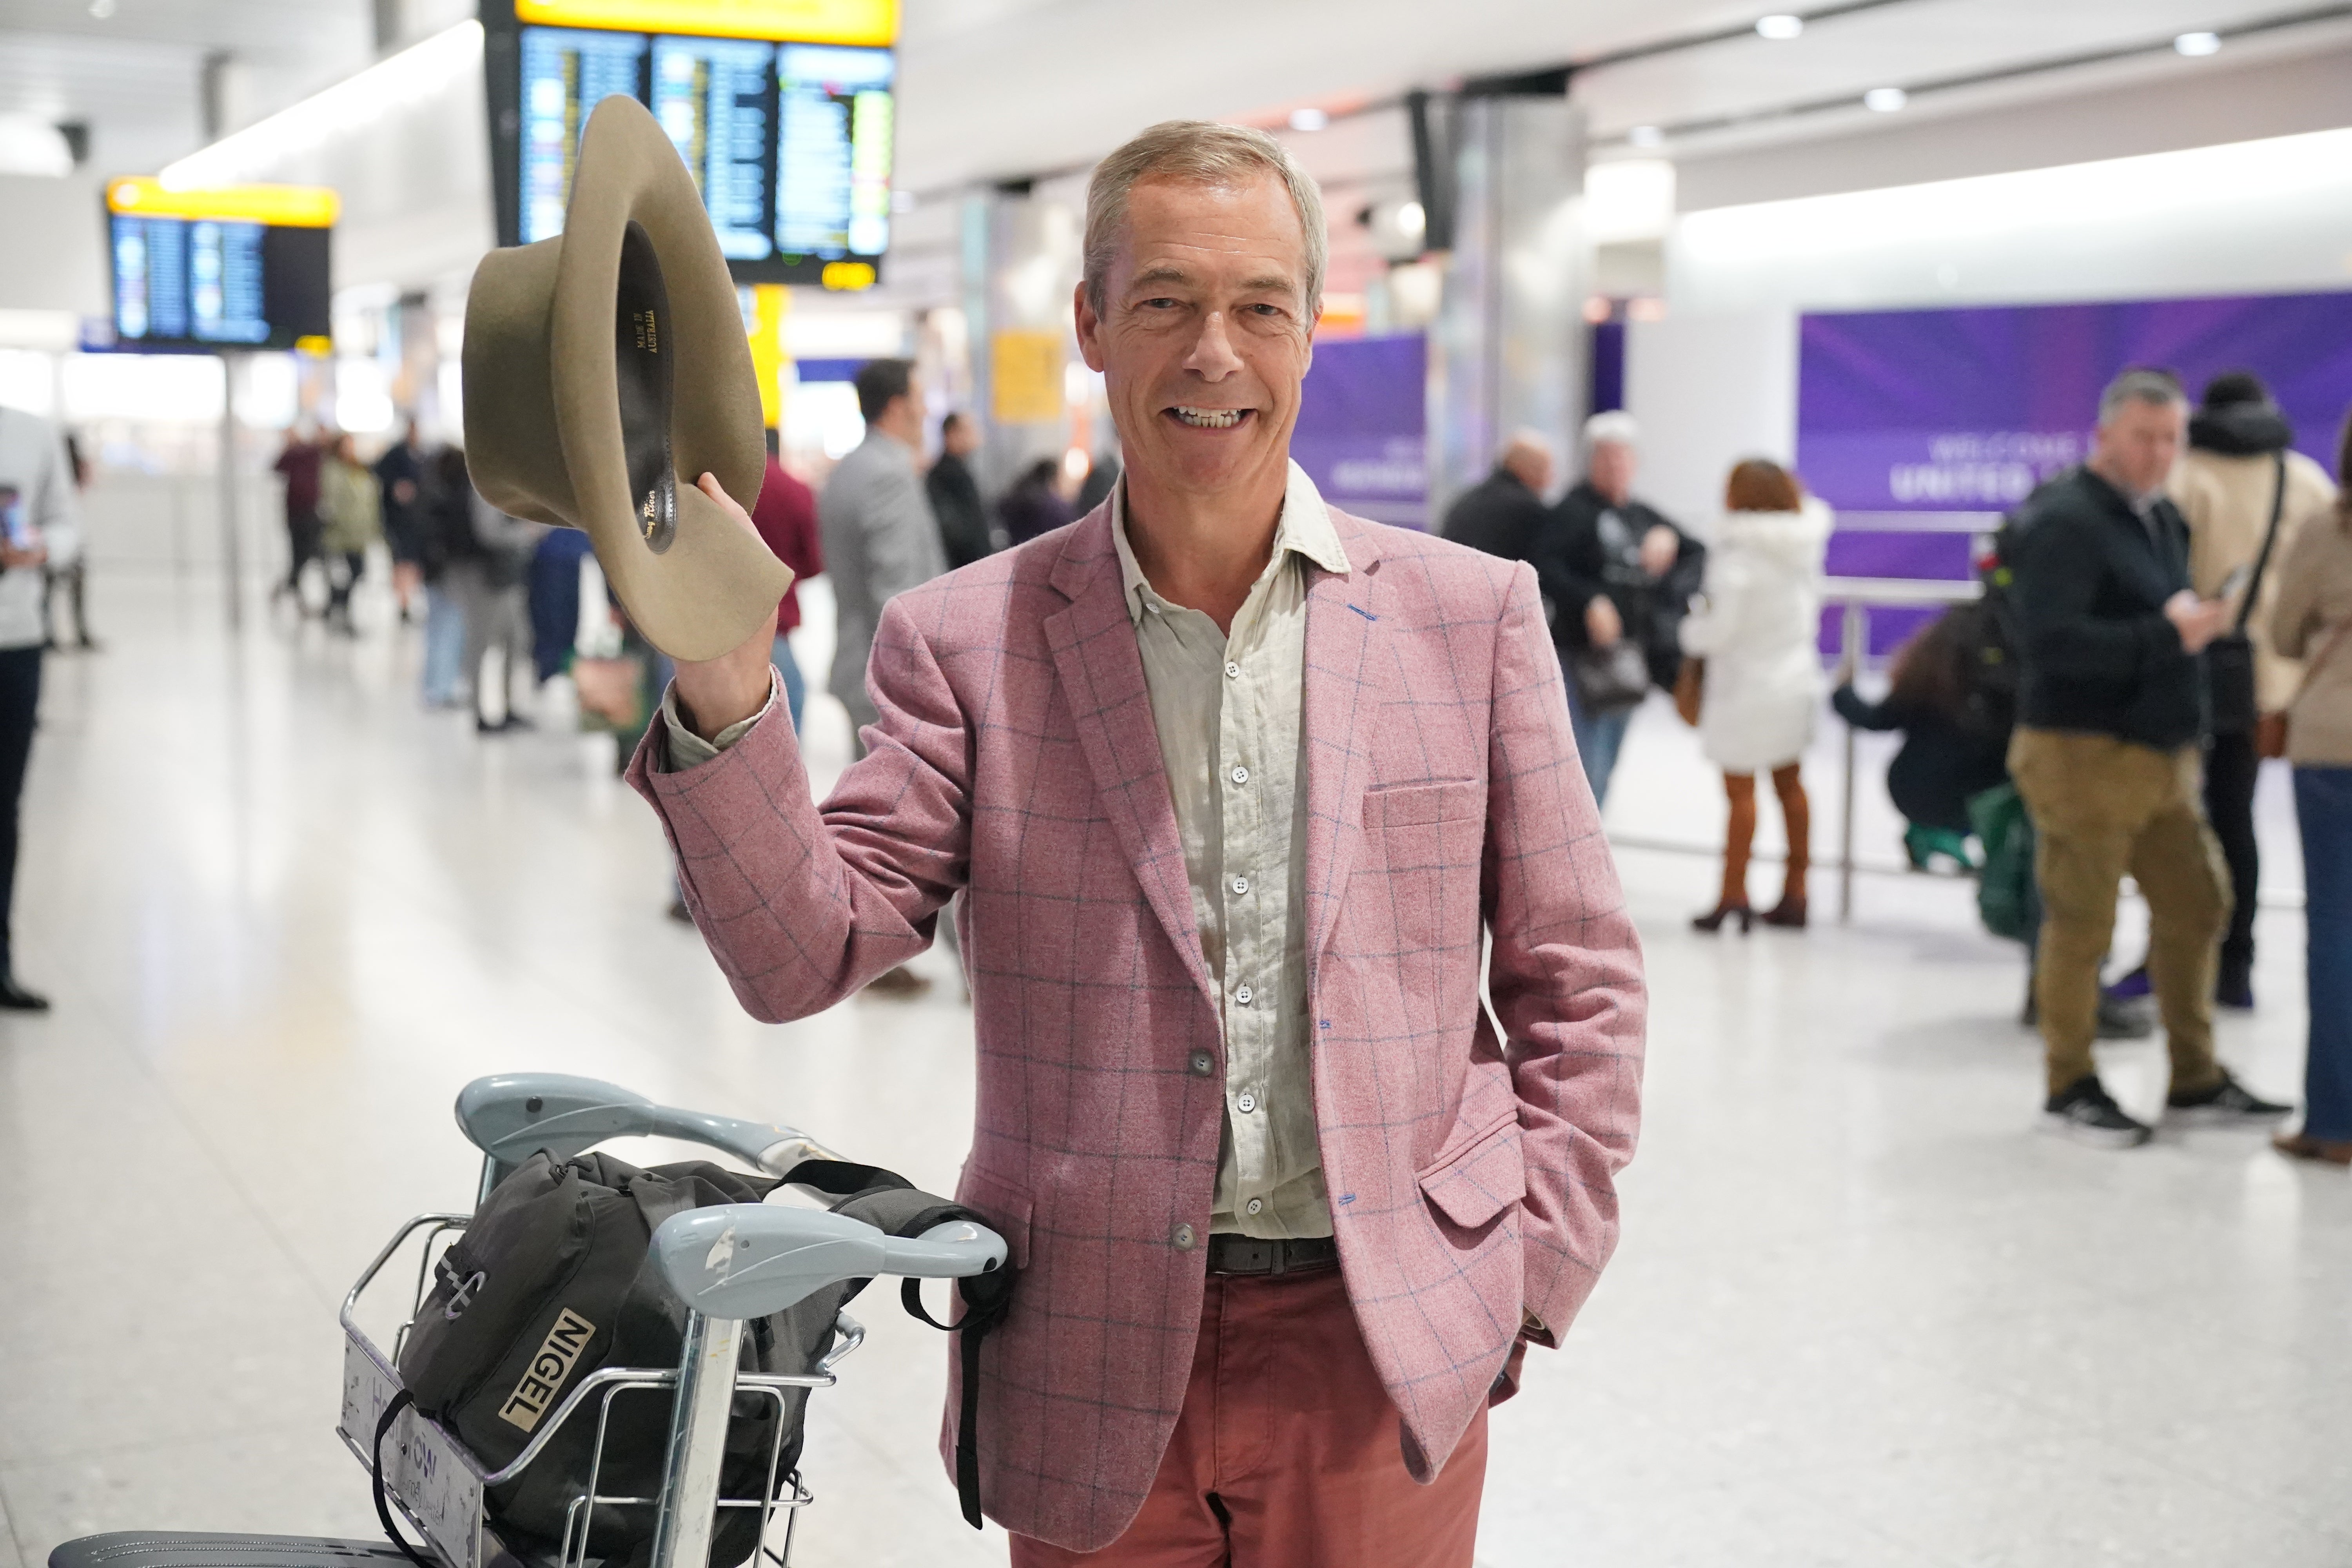 Nigel Farage after returning from a stint on I’m a Celebrity... Get Me Out of Here